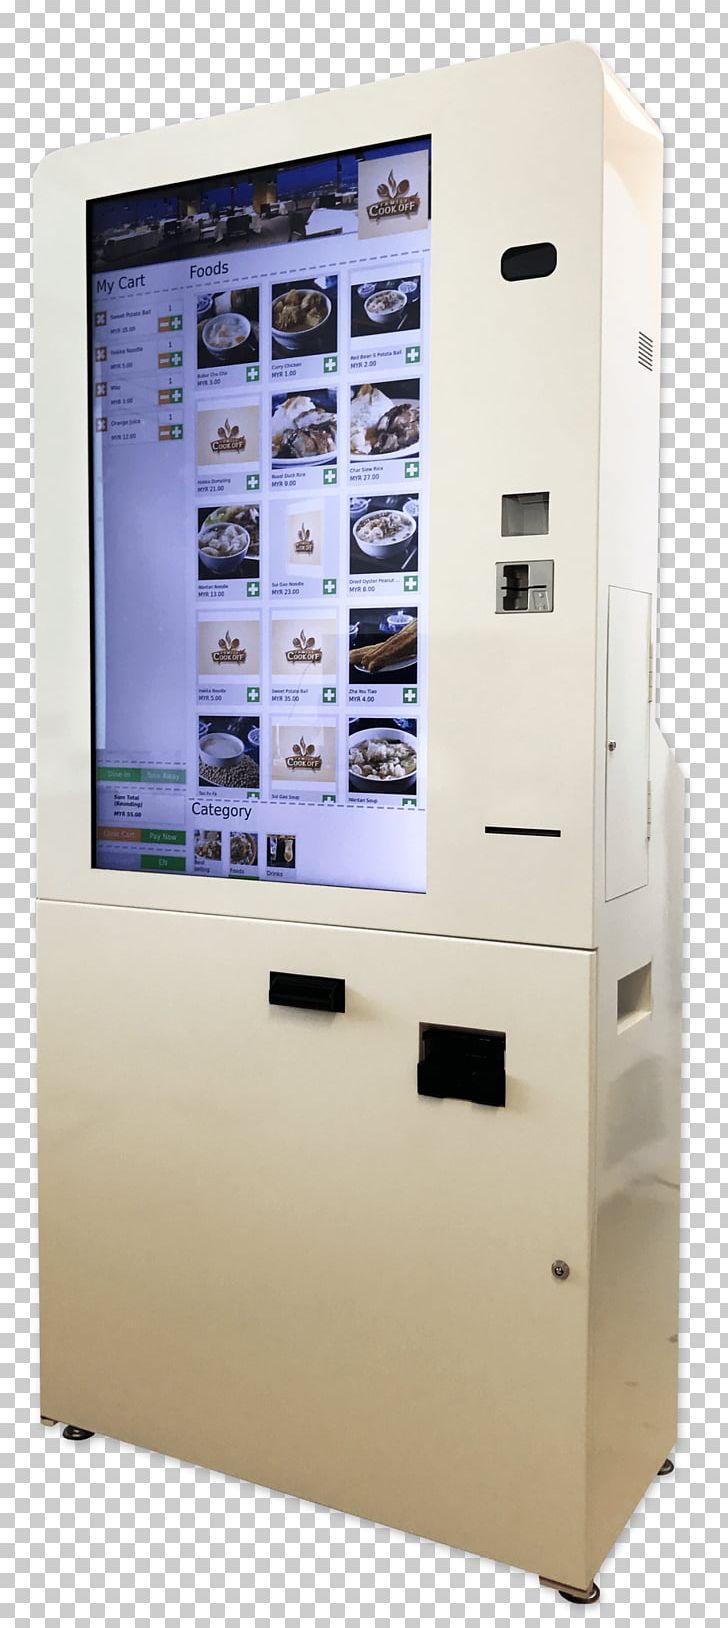 Vending Machines Interactive Kiosks Industry Company PNG, Clipart, Company, Customer, Electronic Device, Enclosure, Fast Food Restaurant Free PNG Download